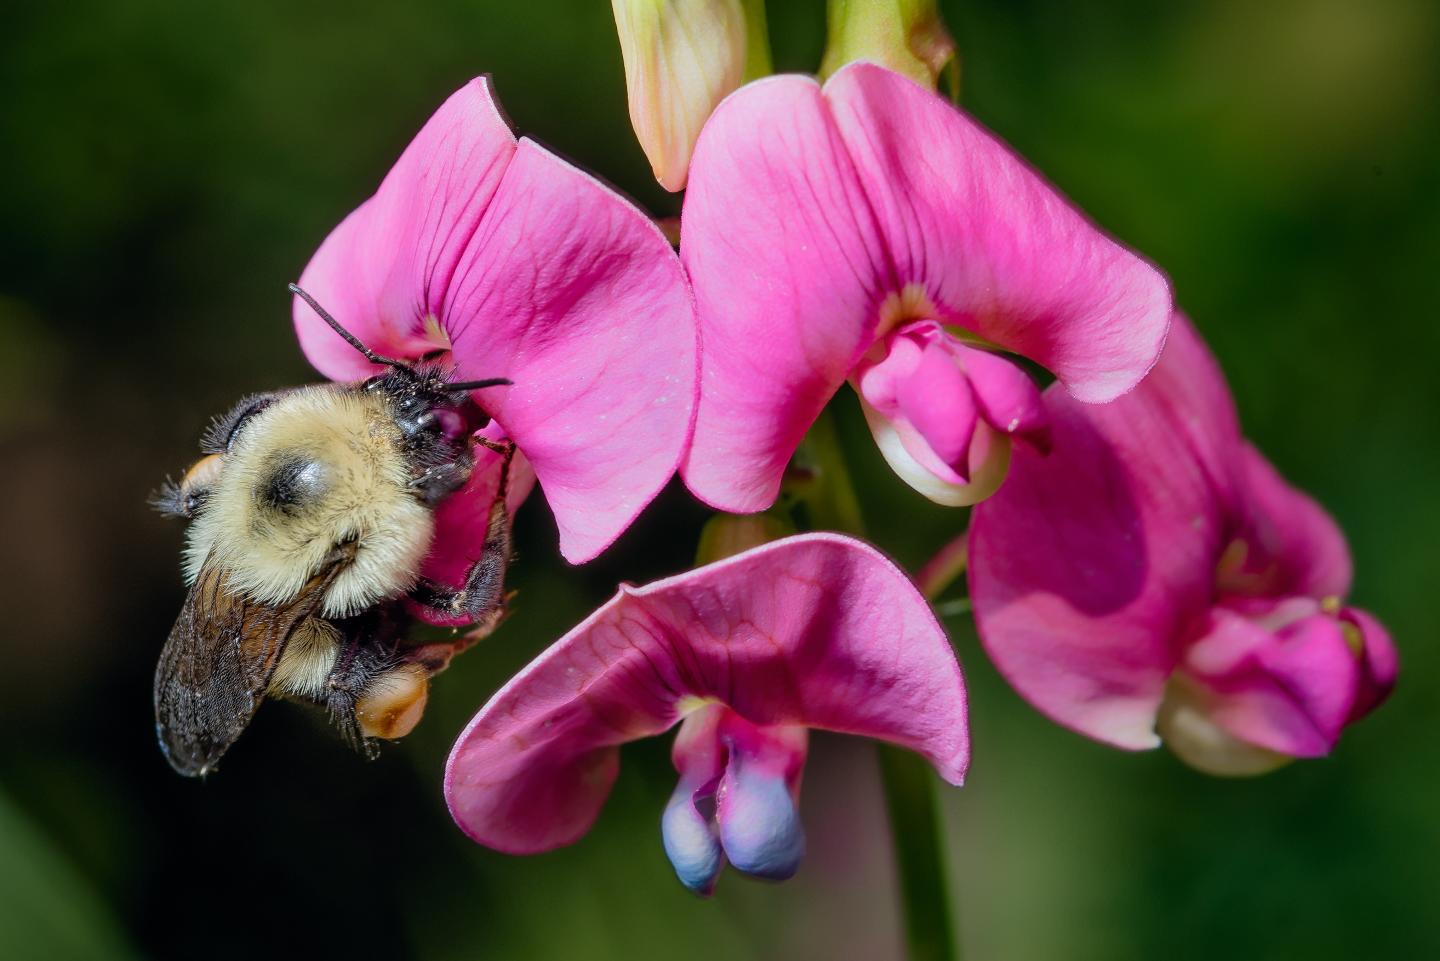 Humans need bumble bees—and they are disappearing faster than we thought